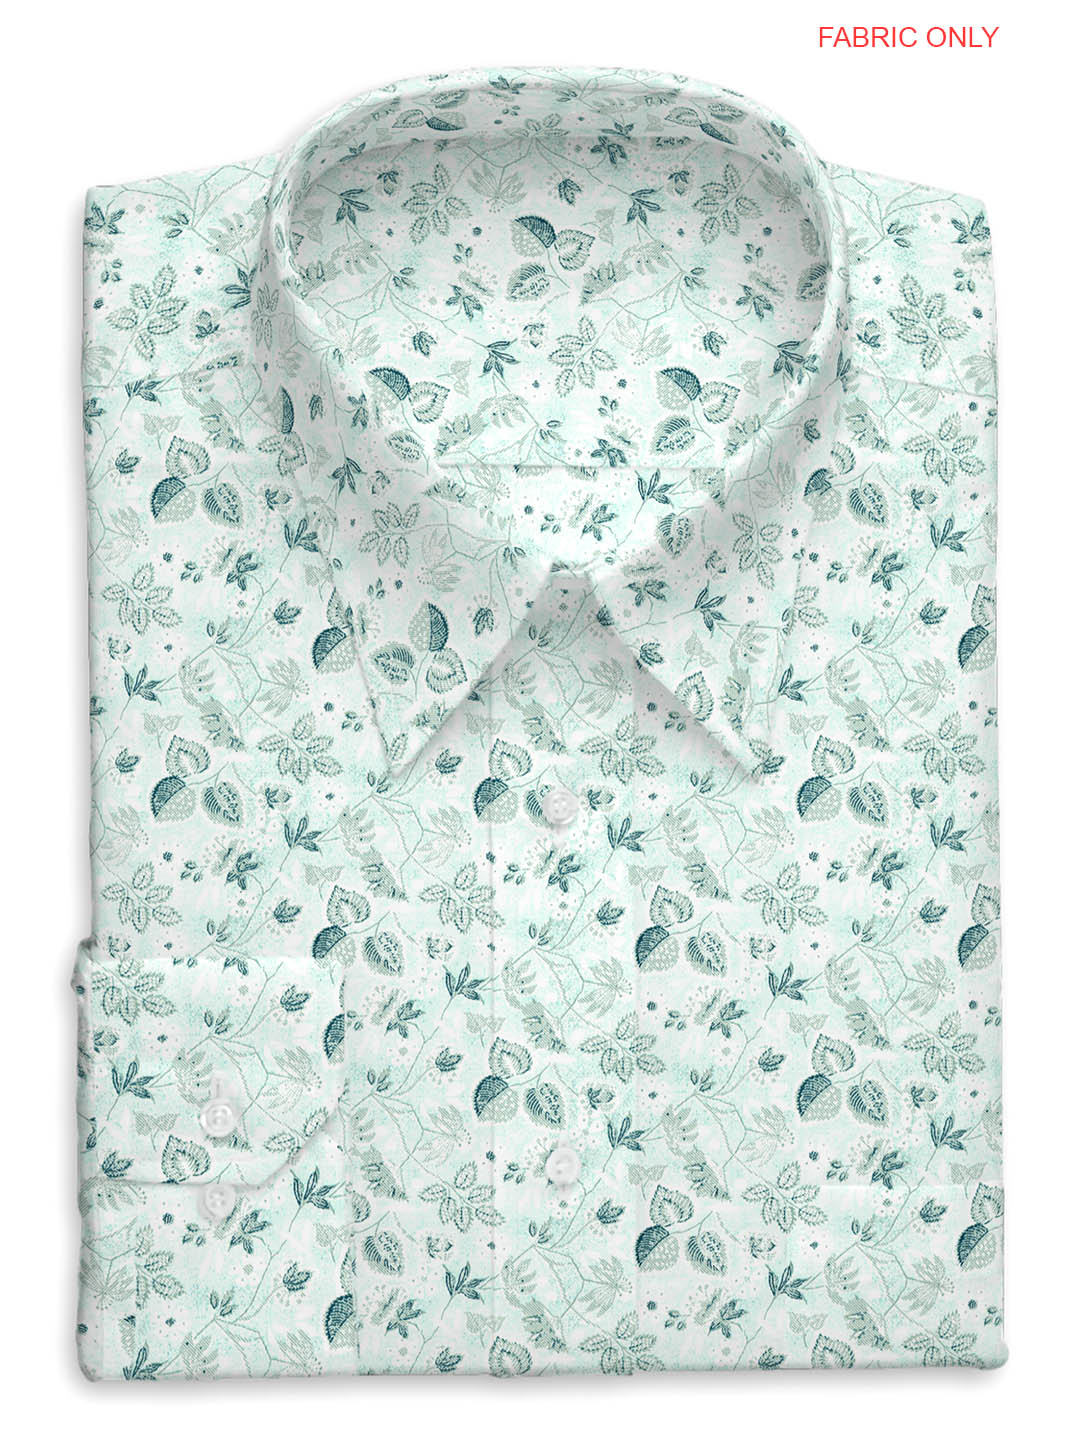 Cotton Green Flowered  All-over Print Shirt Fabric OSLO